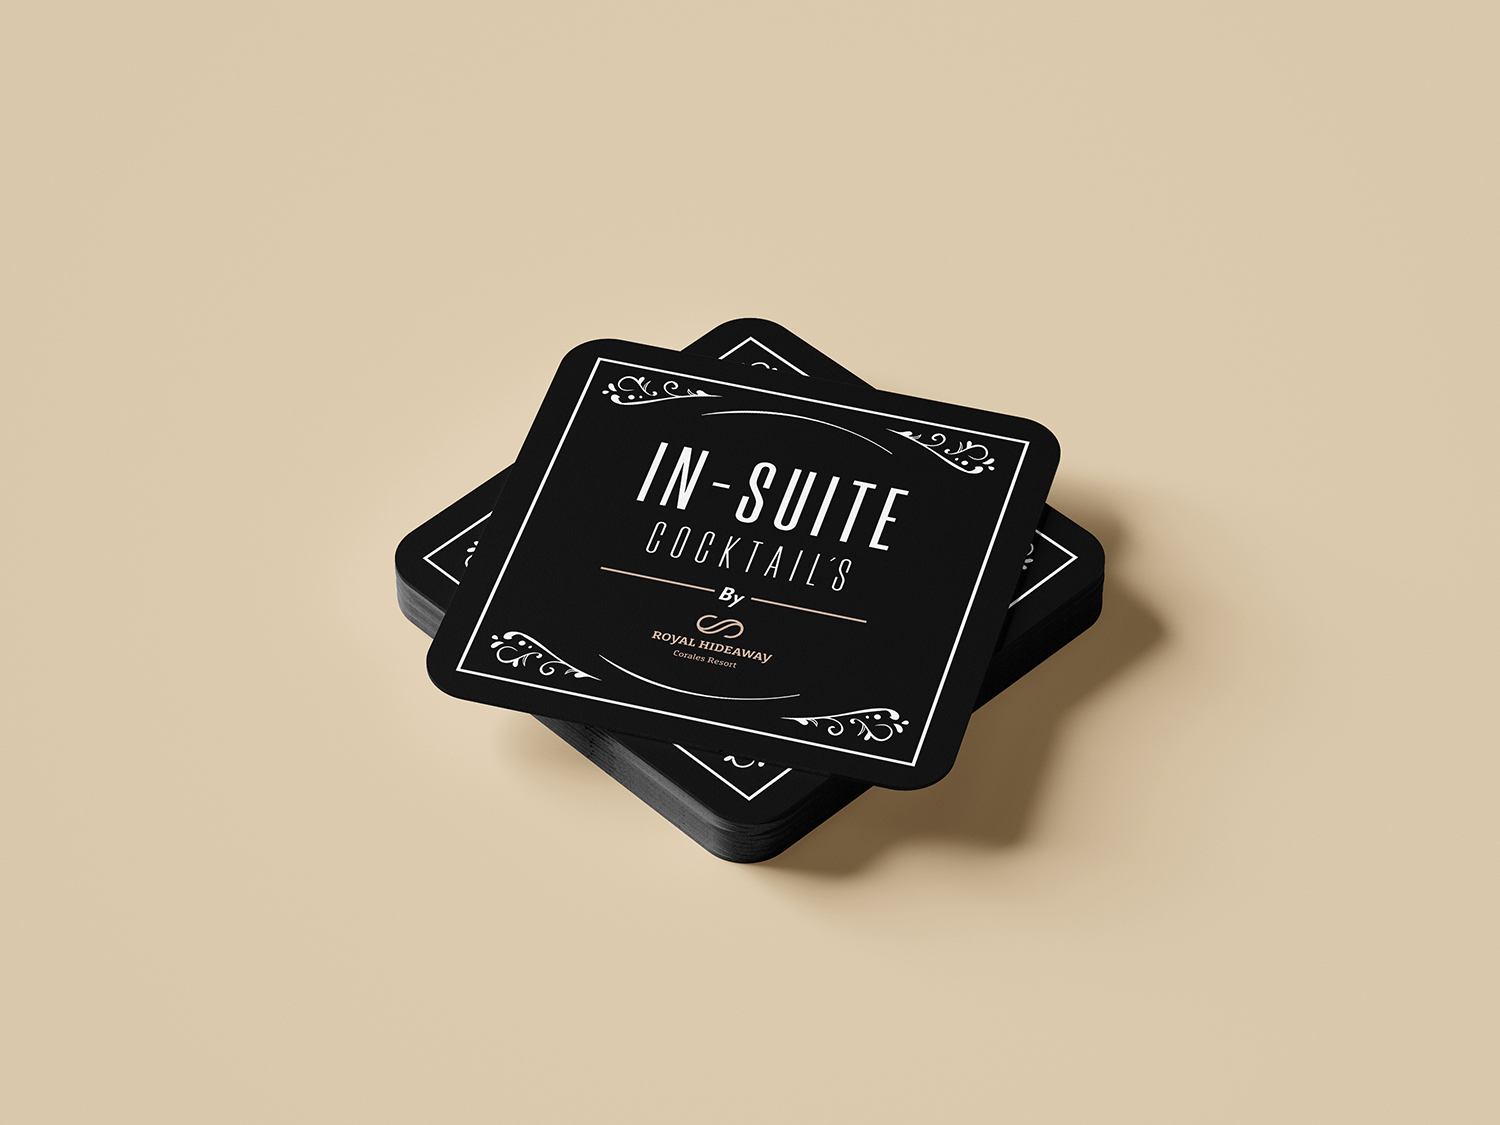 IN-SUITE COCKTAILS COASTERS